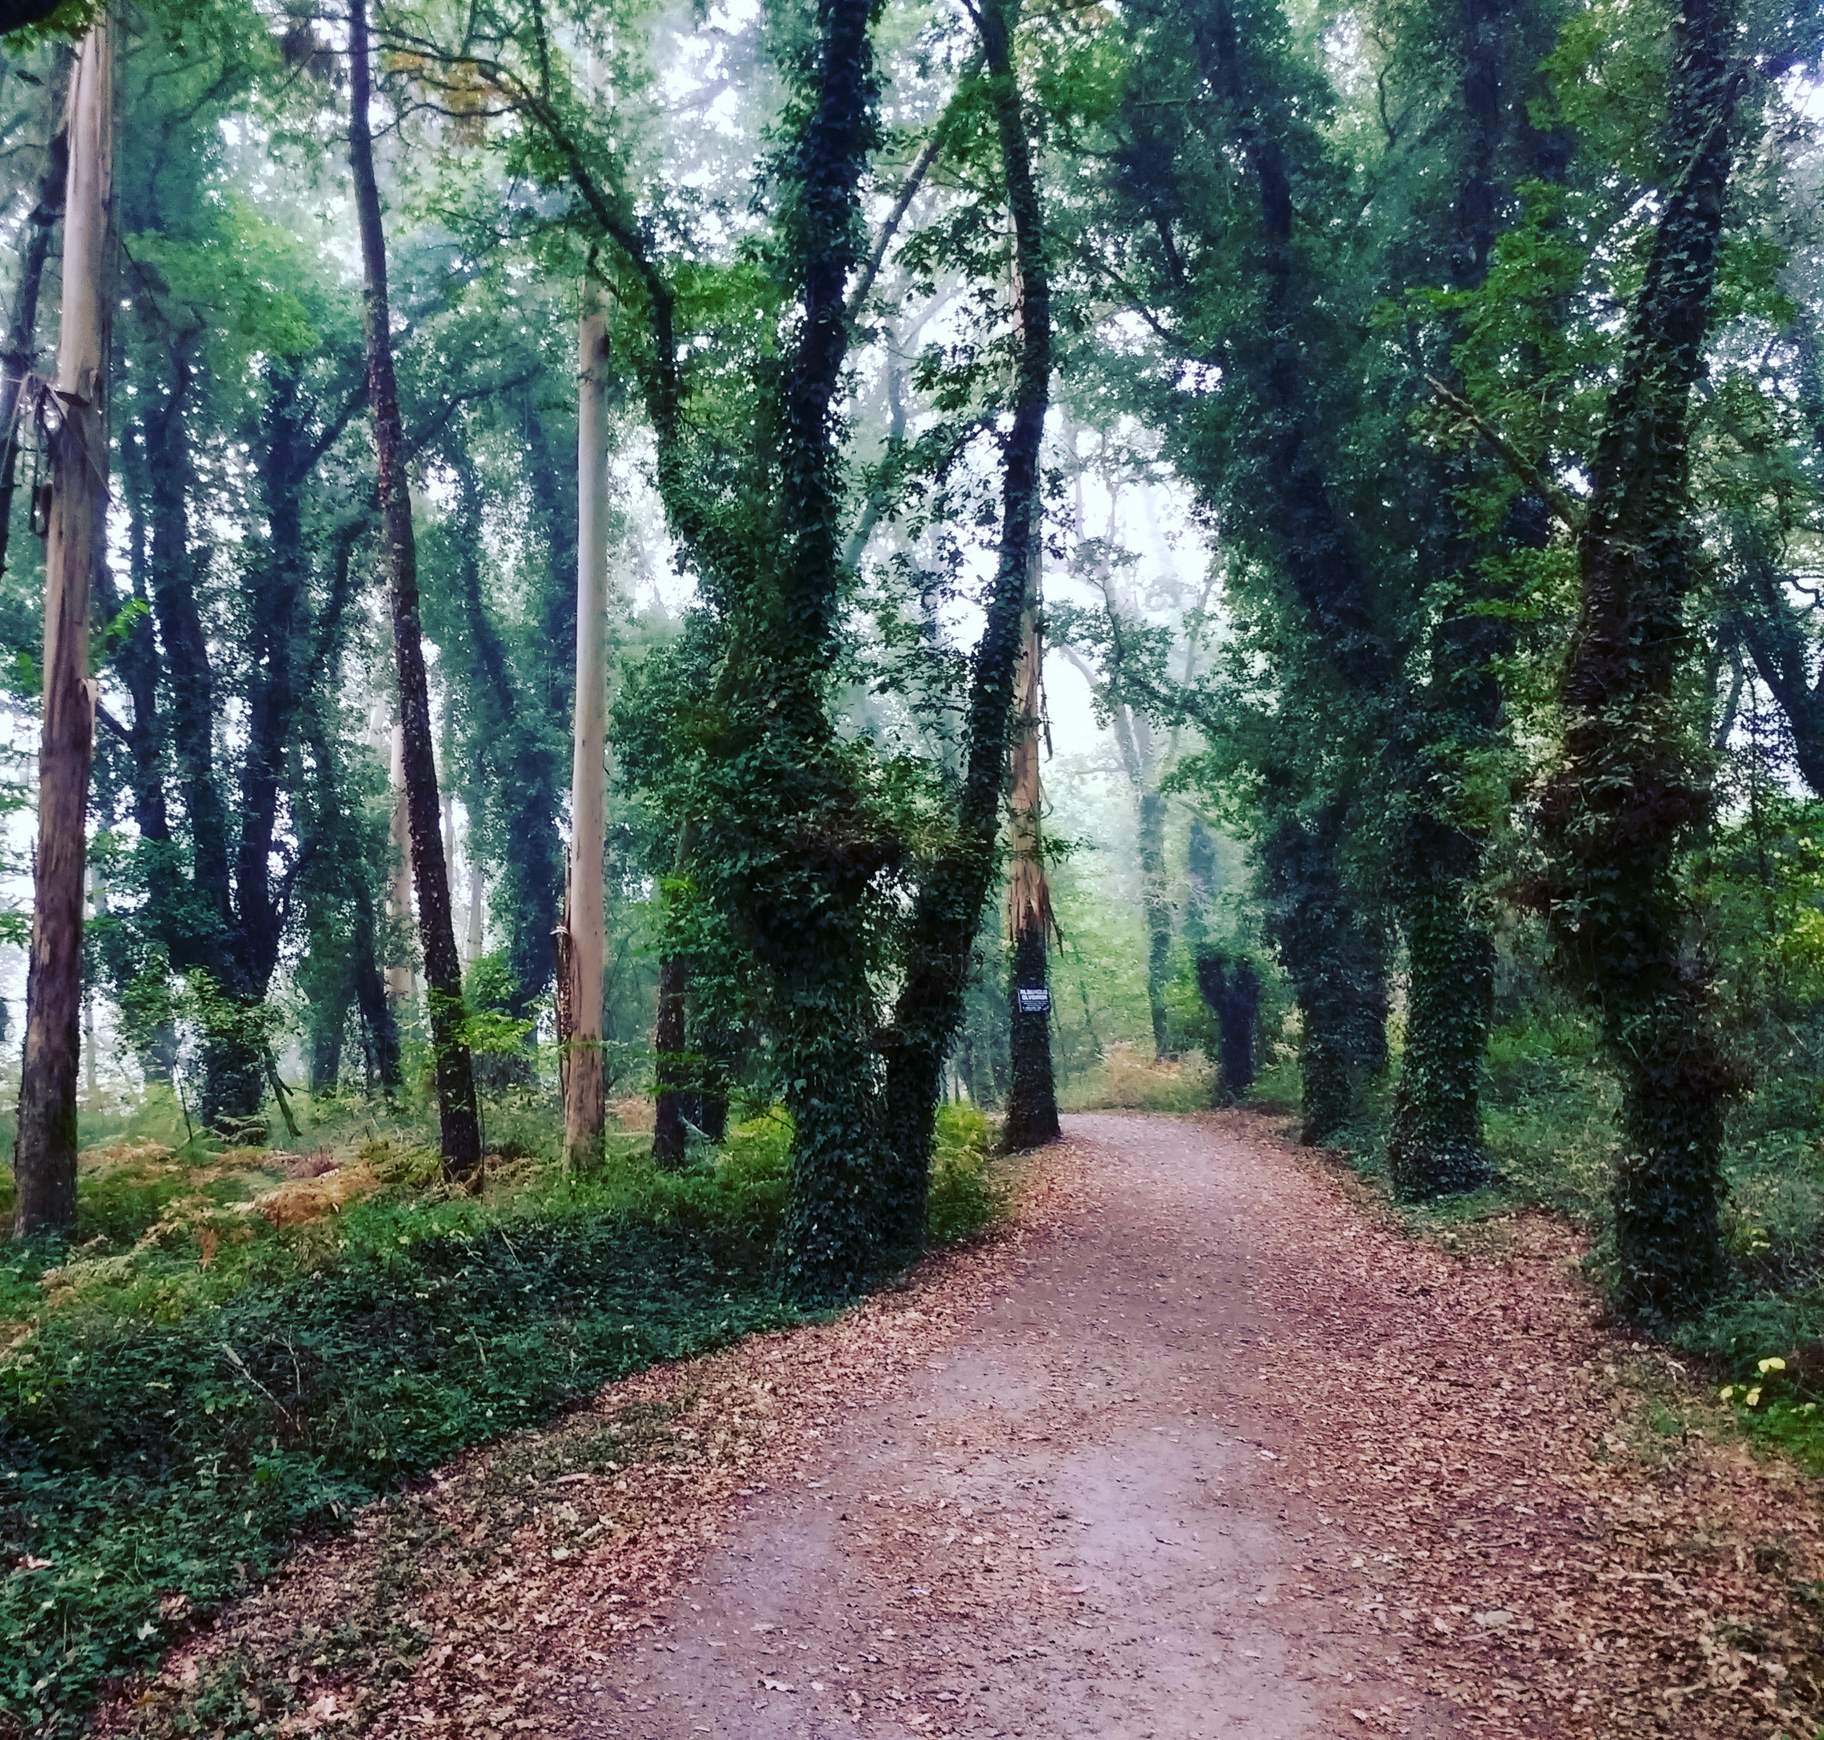 Fog through trees with fallen leaves on the Camino de Fisterra.